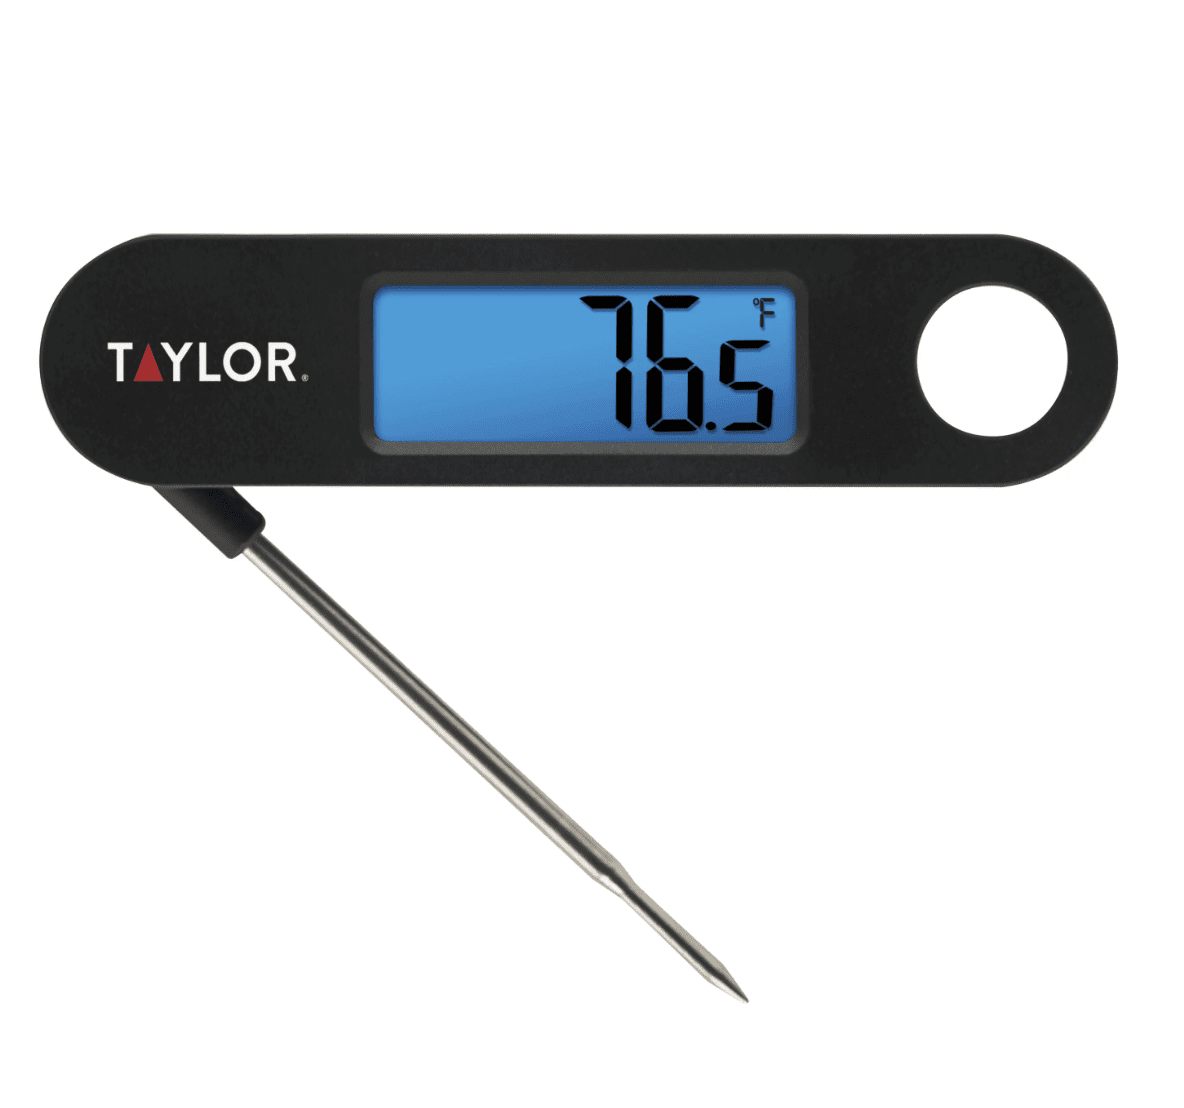 Taylor Digital Folding Probe Meat Thermometer